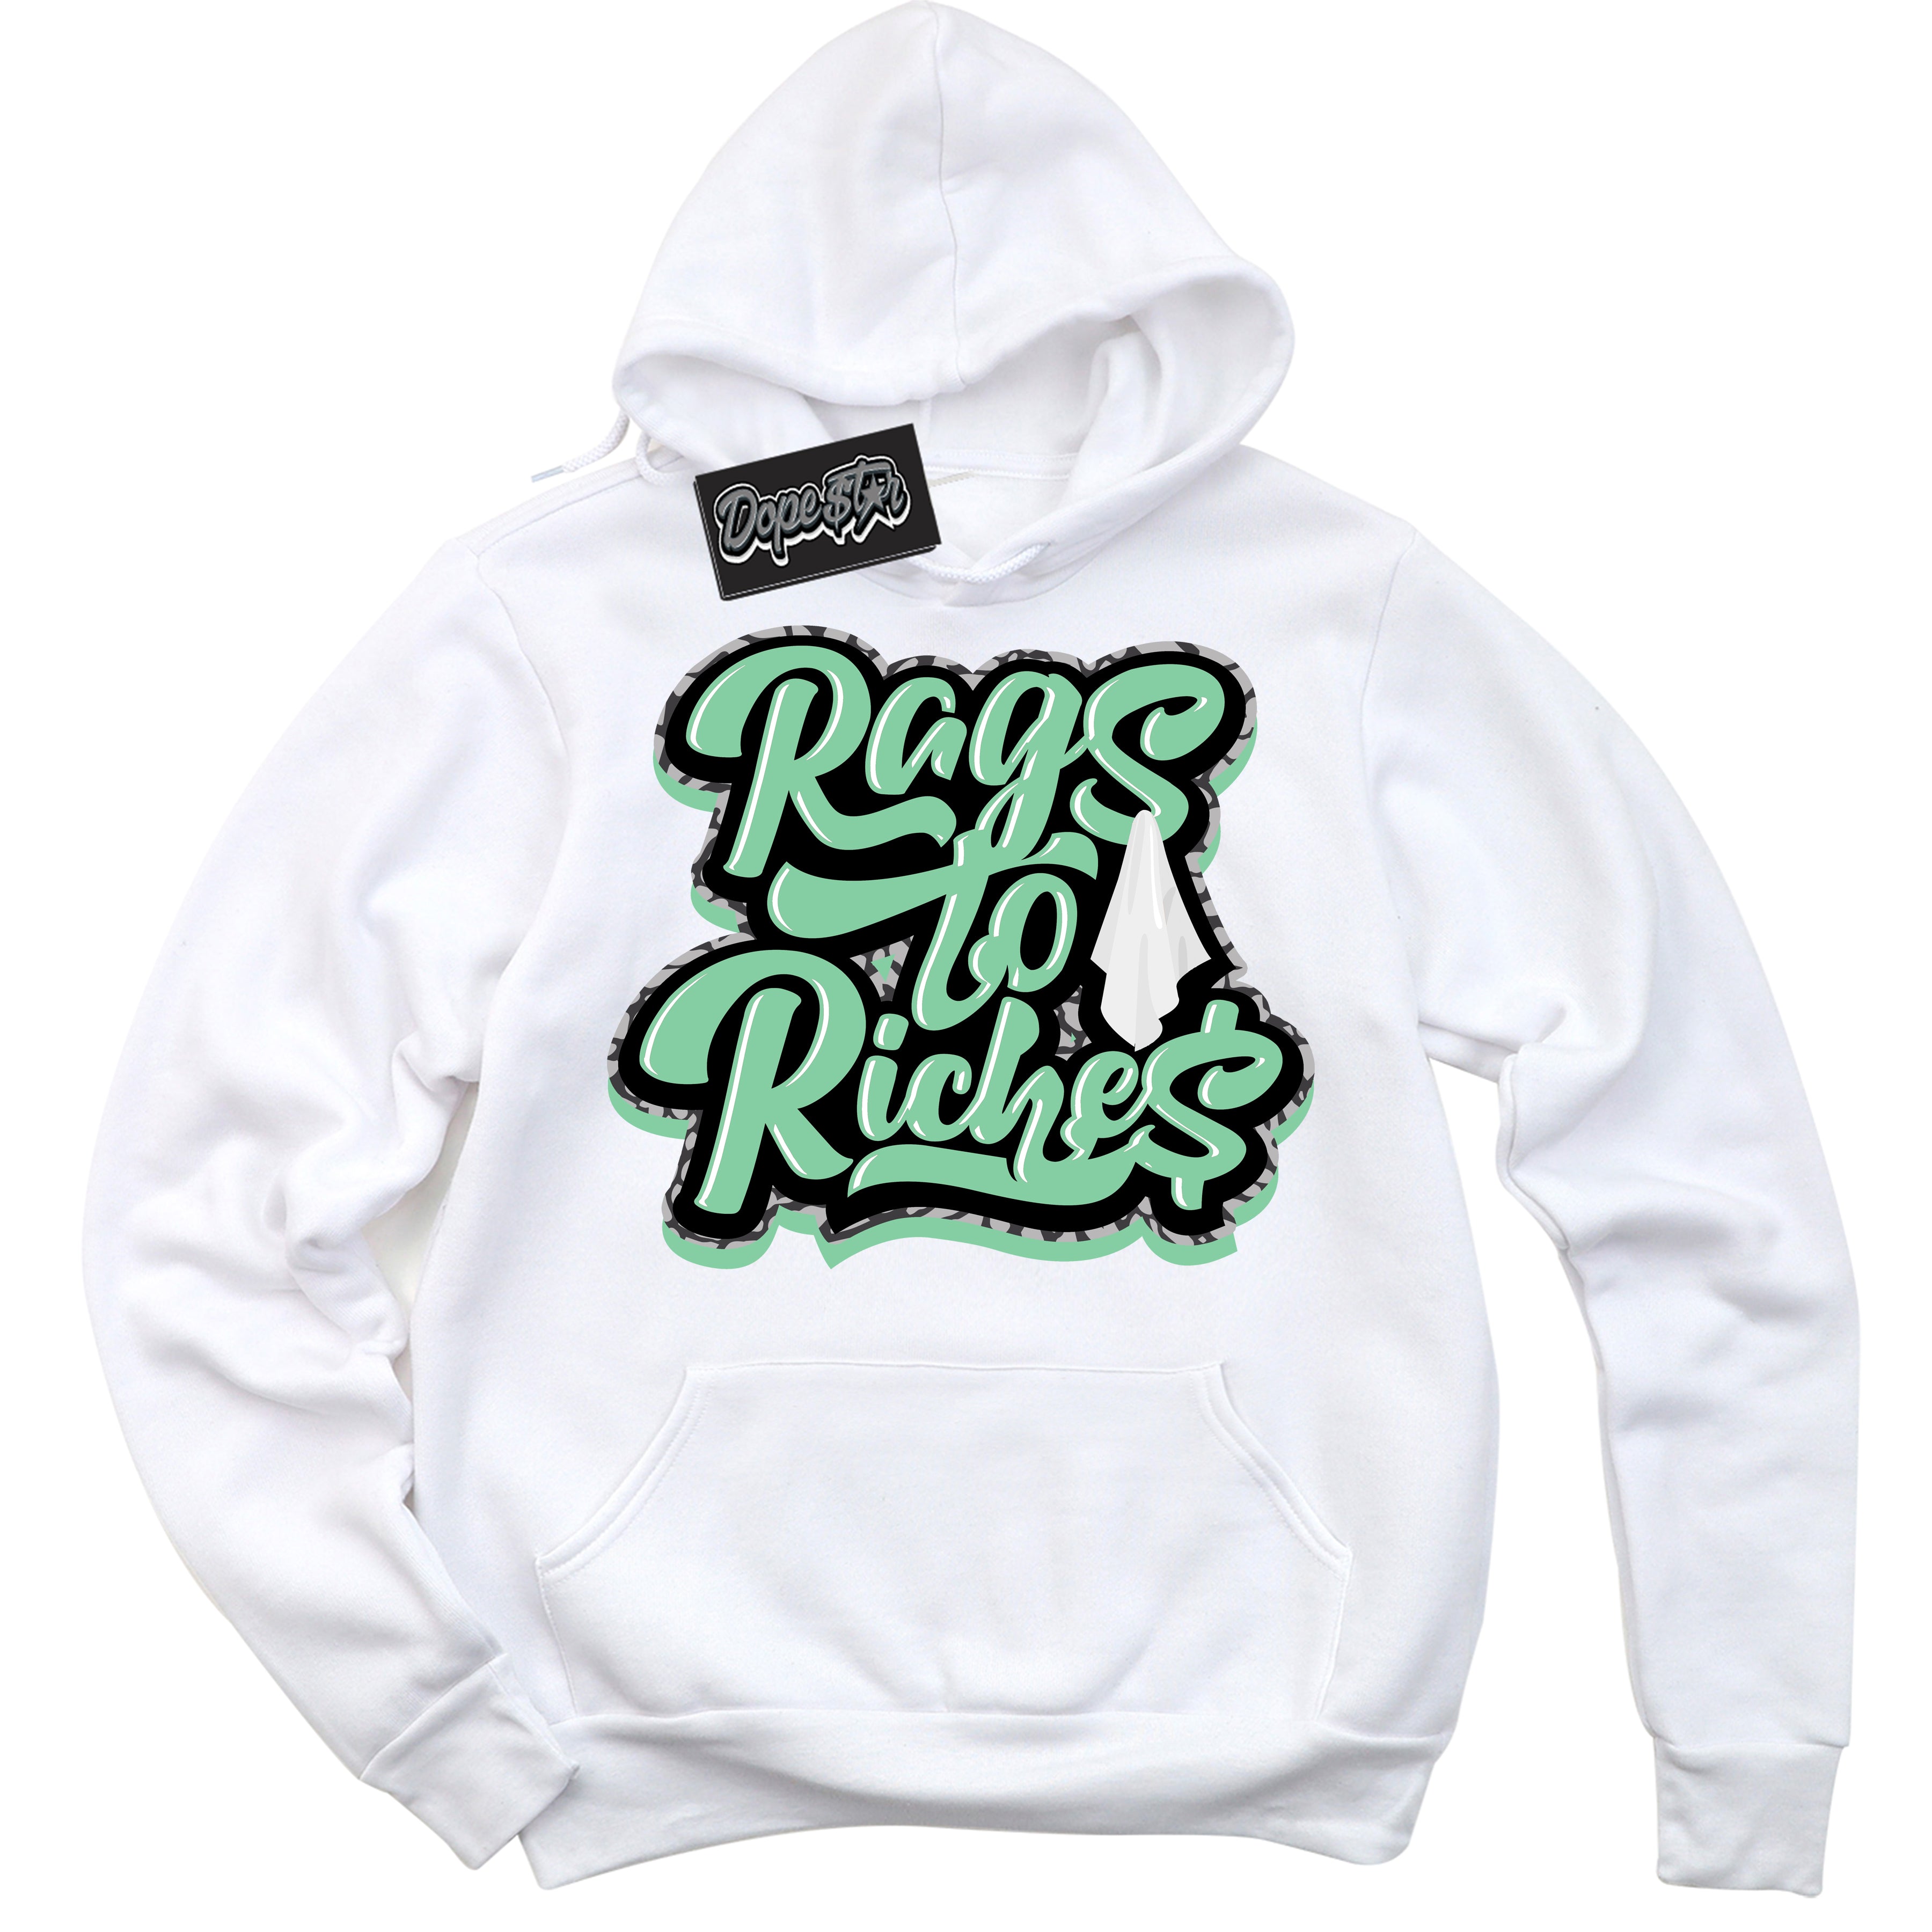 Cool White Graphic DopeStar Hoodie with “ Rags To Riches “ print, that perfectly matches Green Glow 3s sneakers